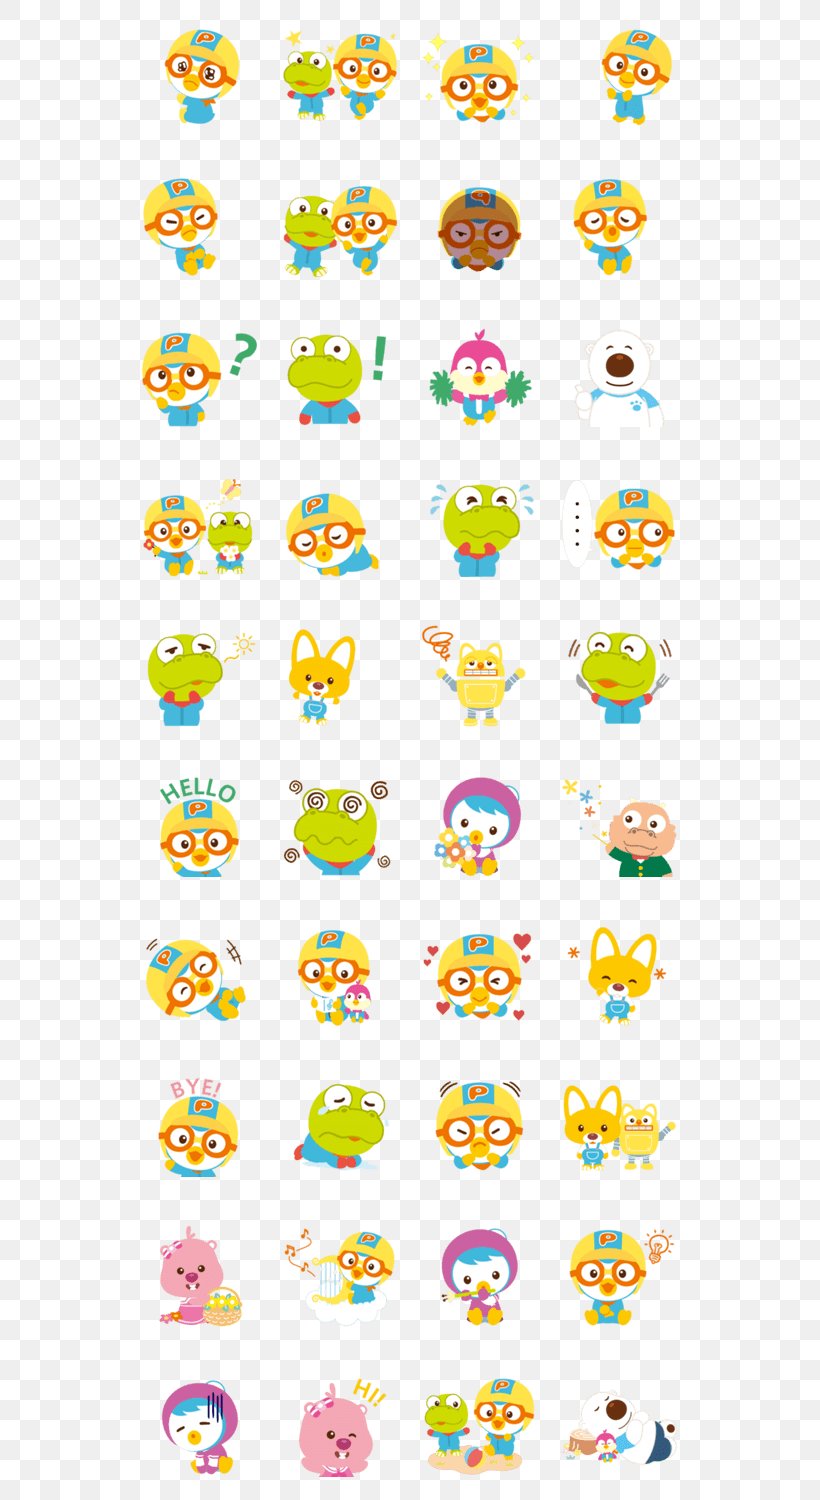 LINE Emoticon Sticker Android Clip Art, PNG, 562x1500px, Emoticon, Android, Cosmetics, Emoji, Facebook Messenger Download Free